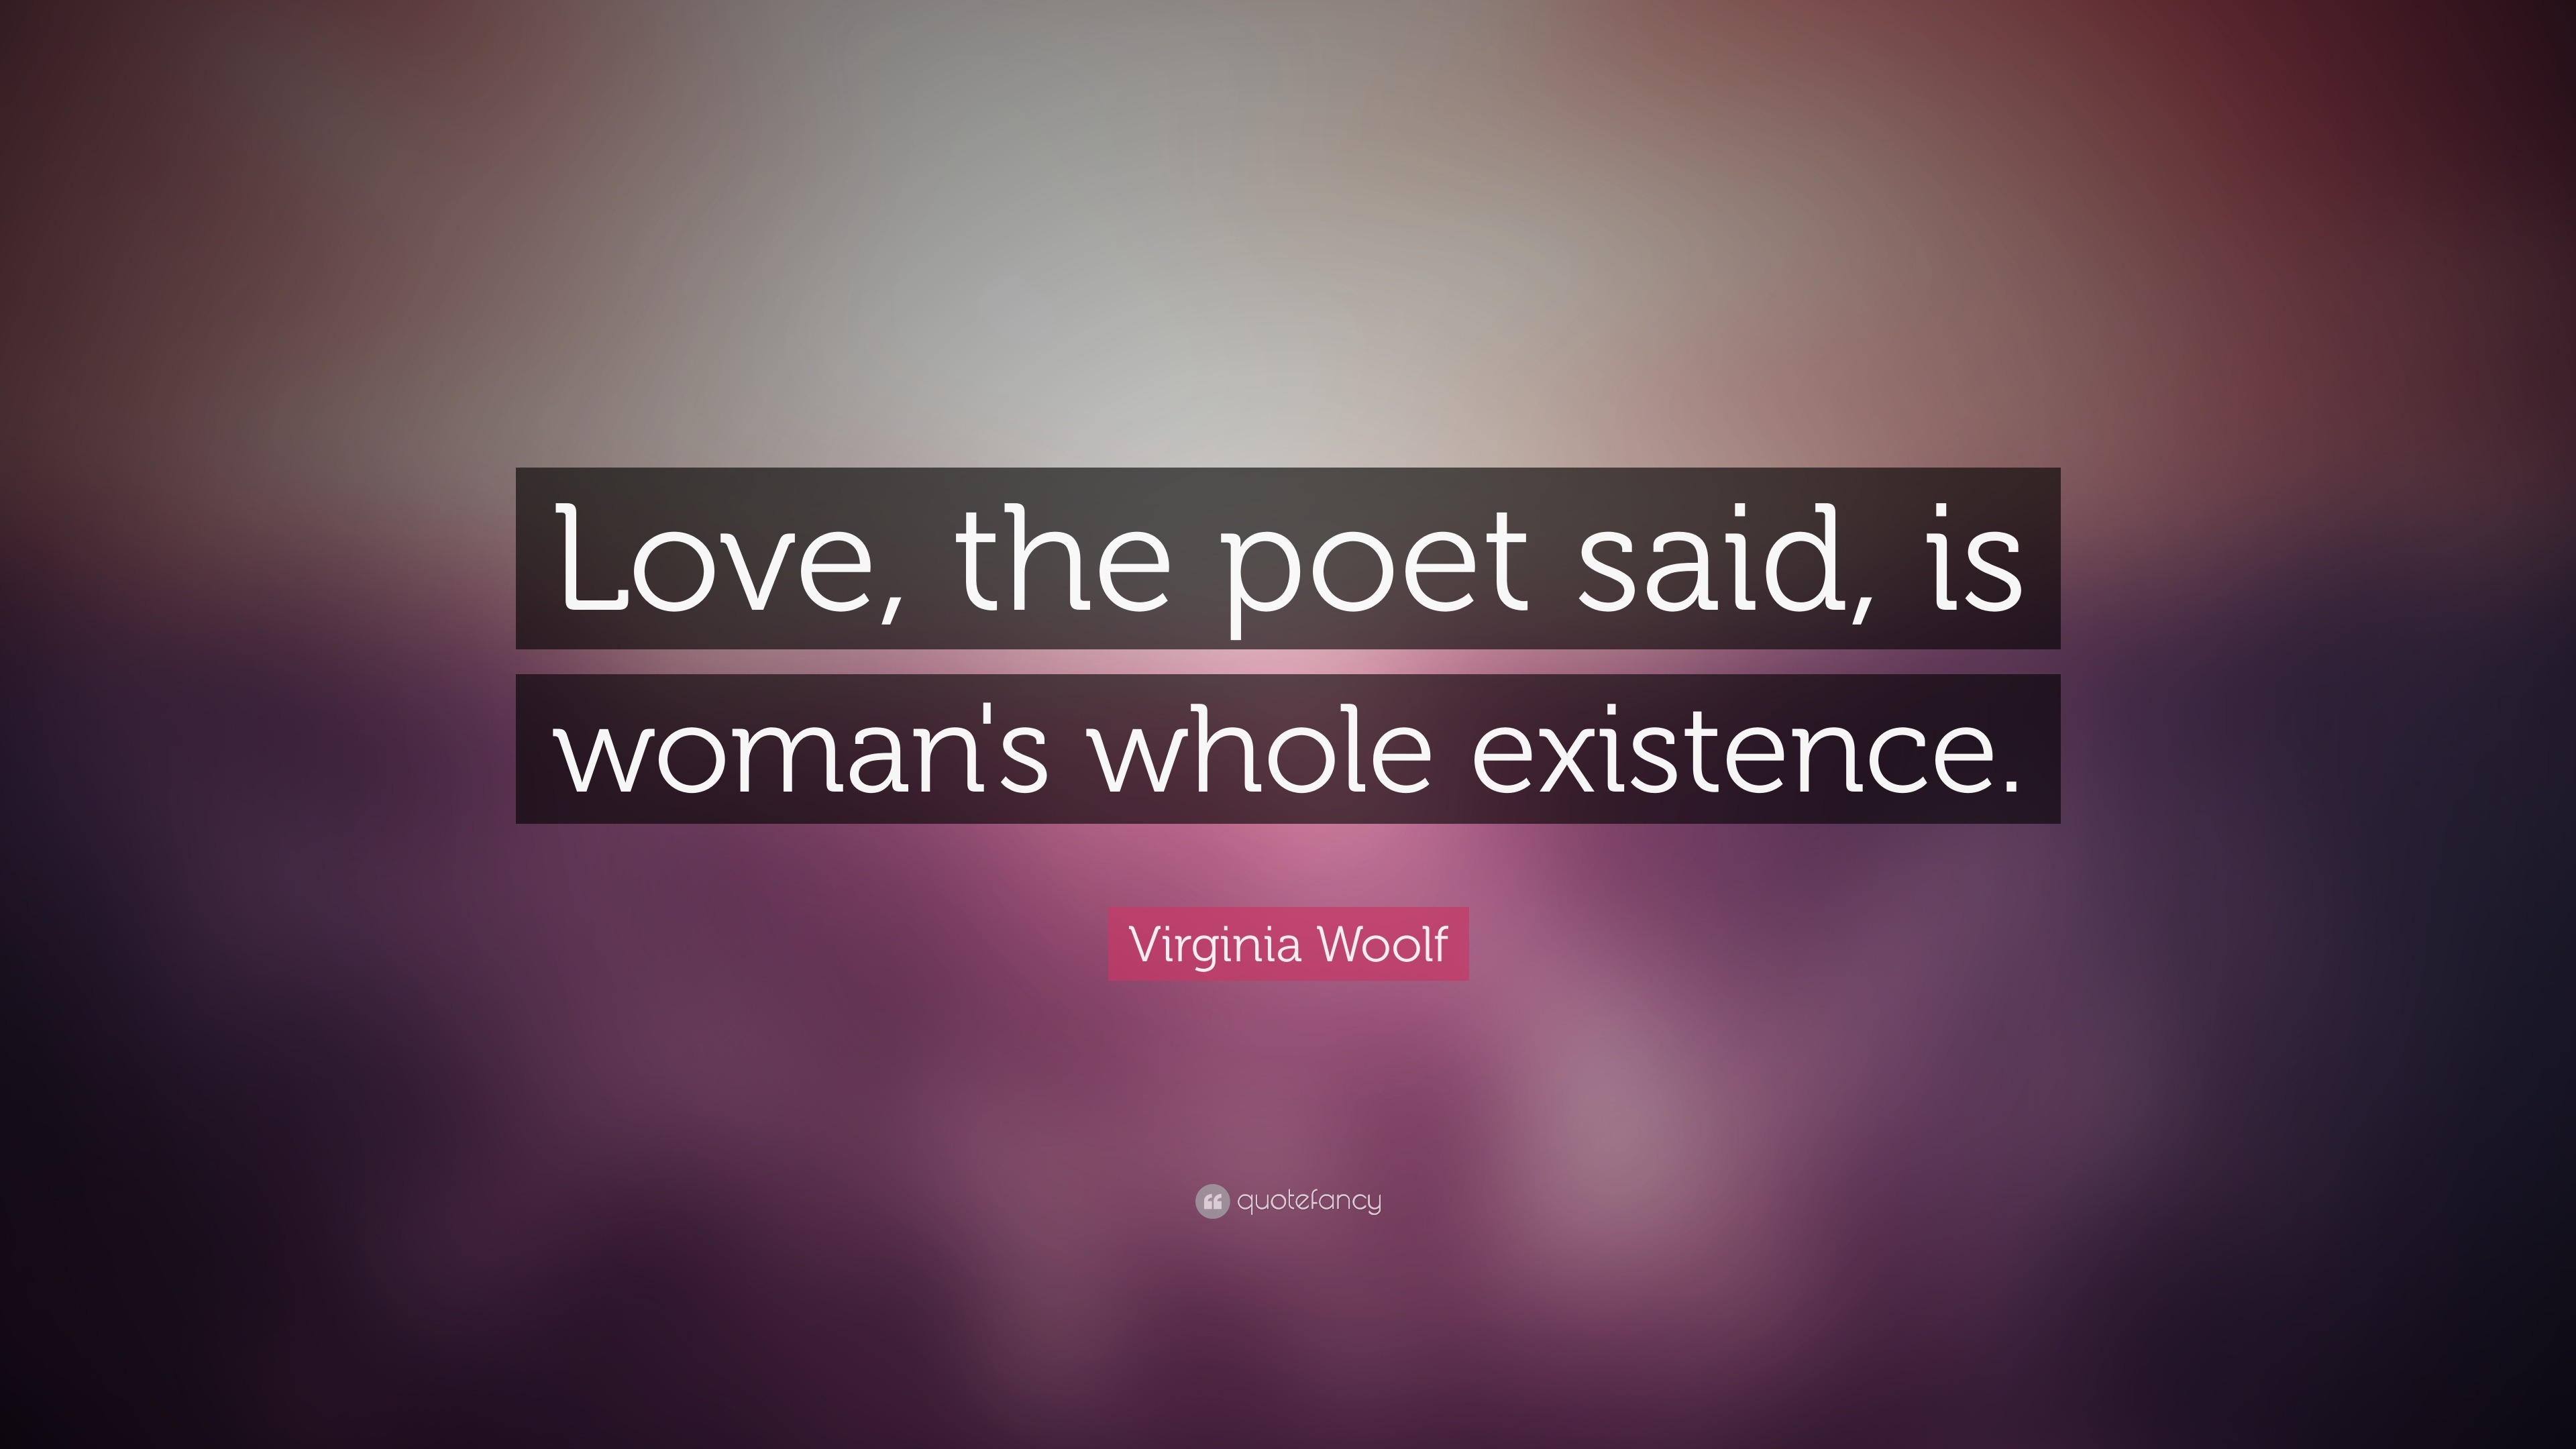 Virginia Woolf Quote: “Love, the poet said, is woman's whole existence.”